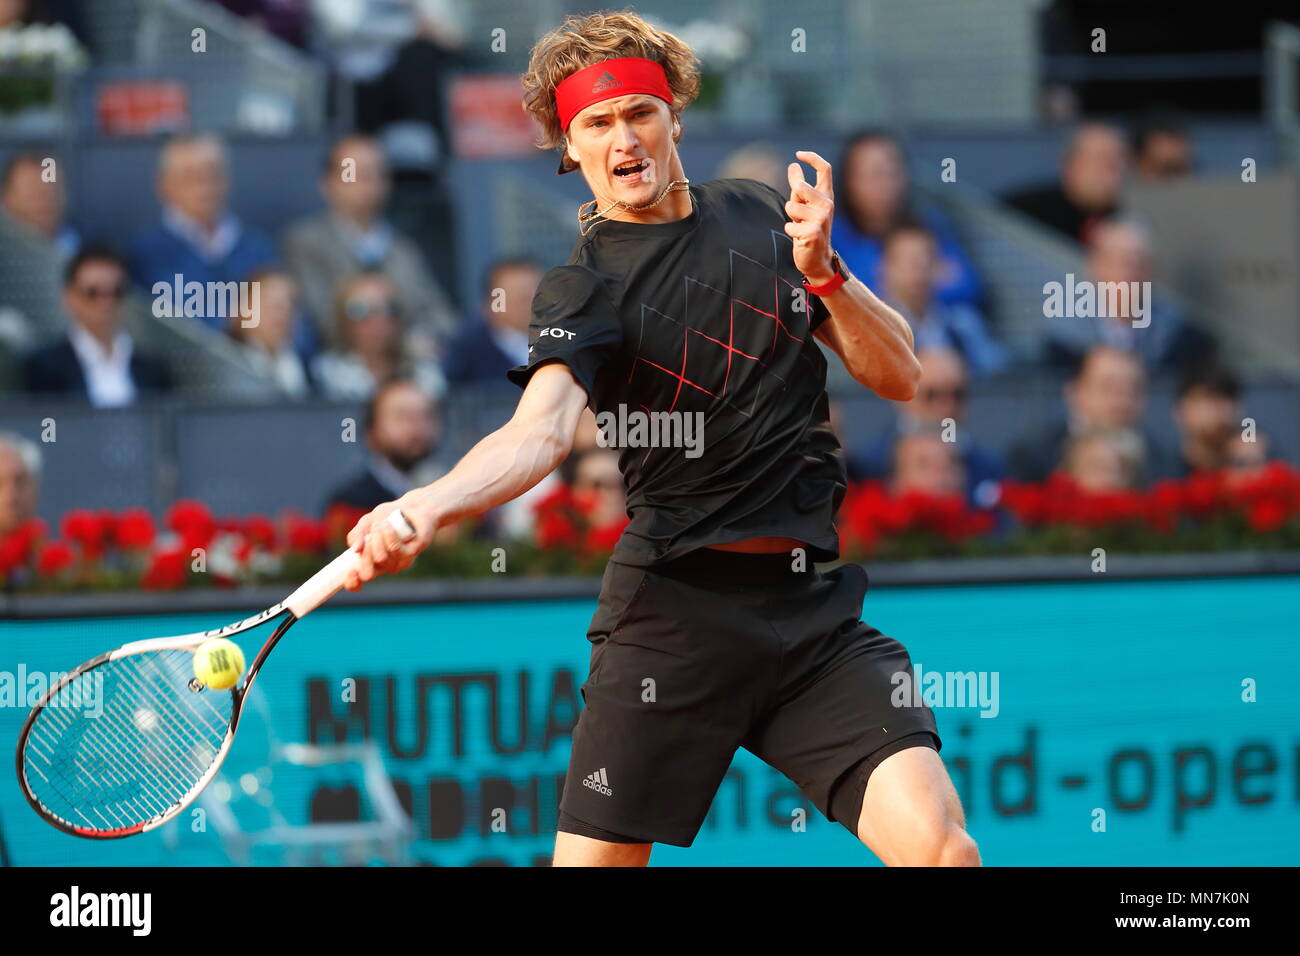 Madrid, Spain, May 13, 2018. 13th May, 2018. Alexander Zverev (GER) Tennis  : Alexander Zverev of Germany during singles final round match against  Dominic Thiem of Austria on the ATP World Tour